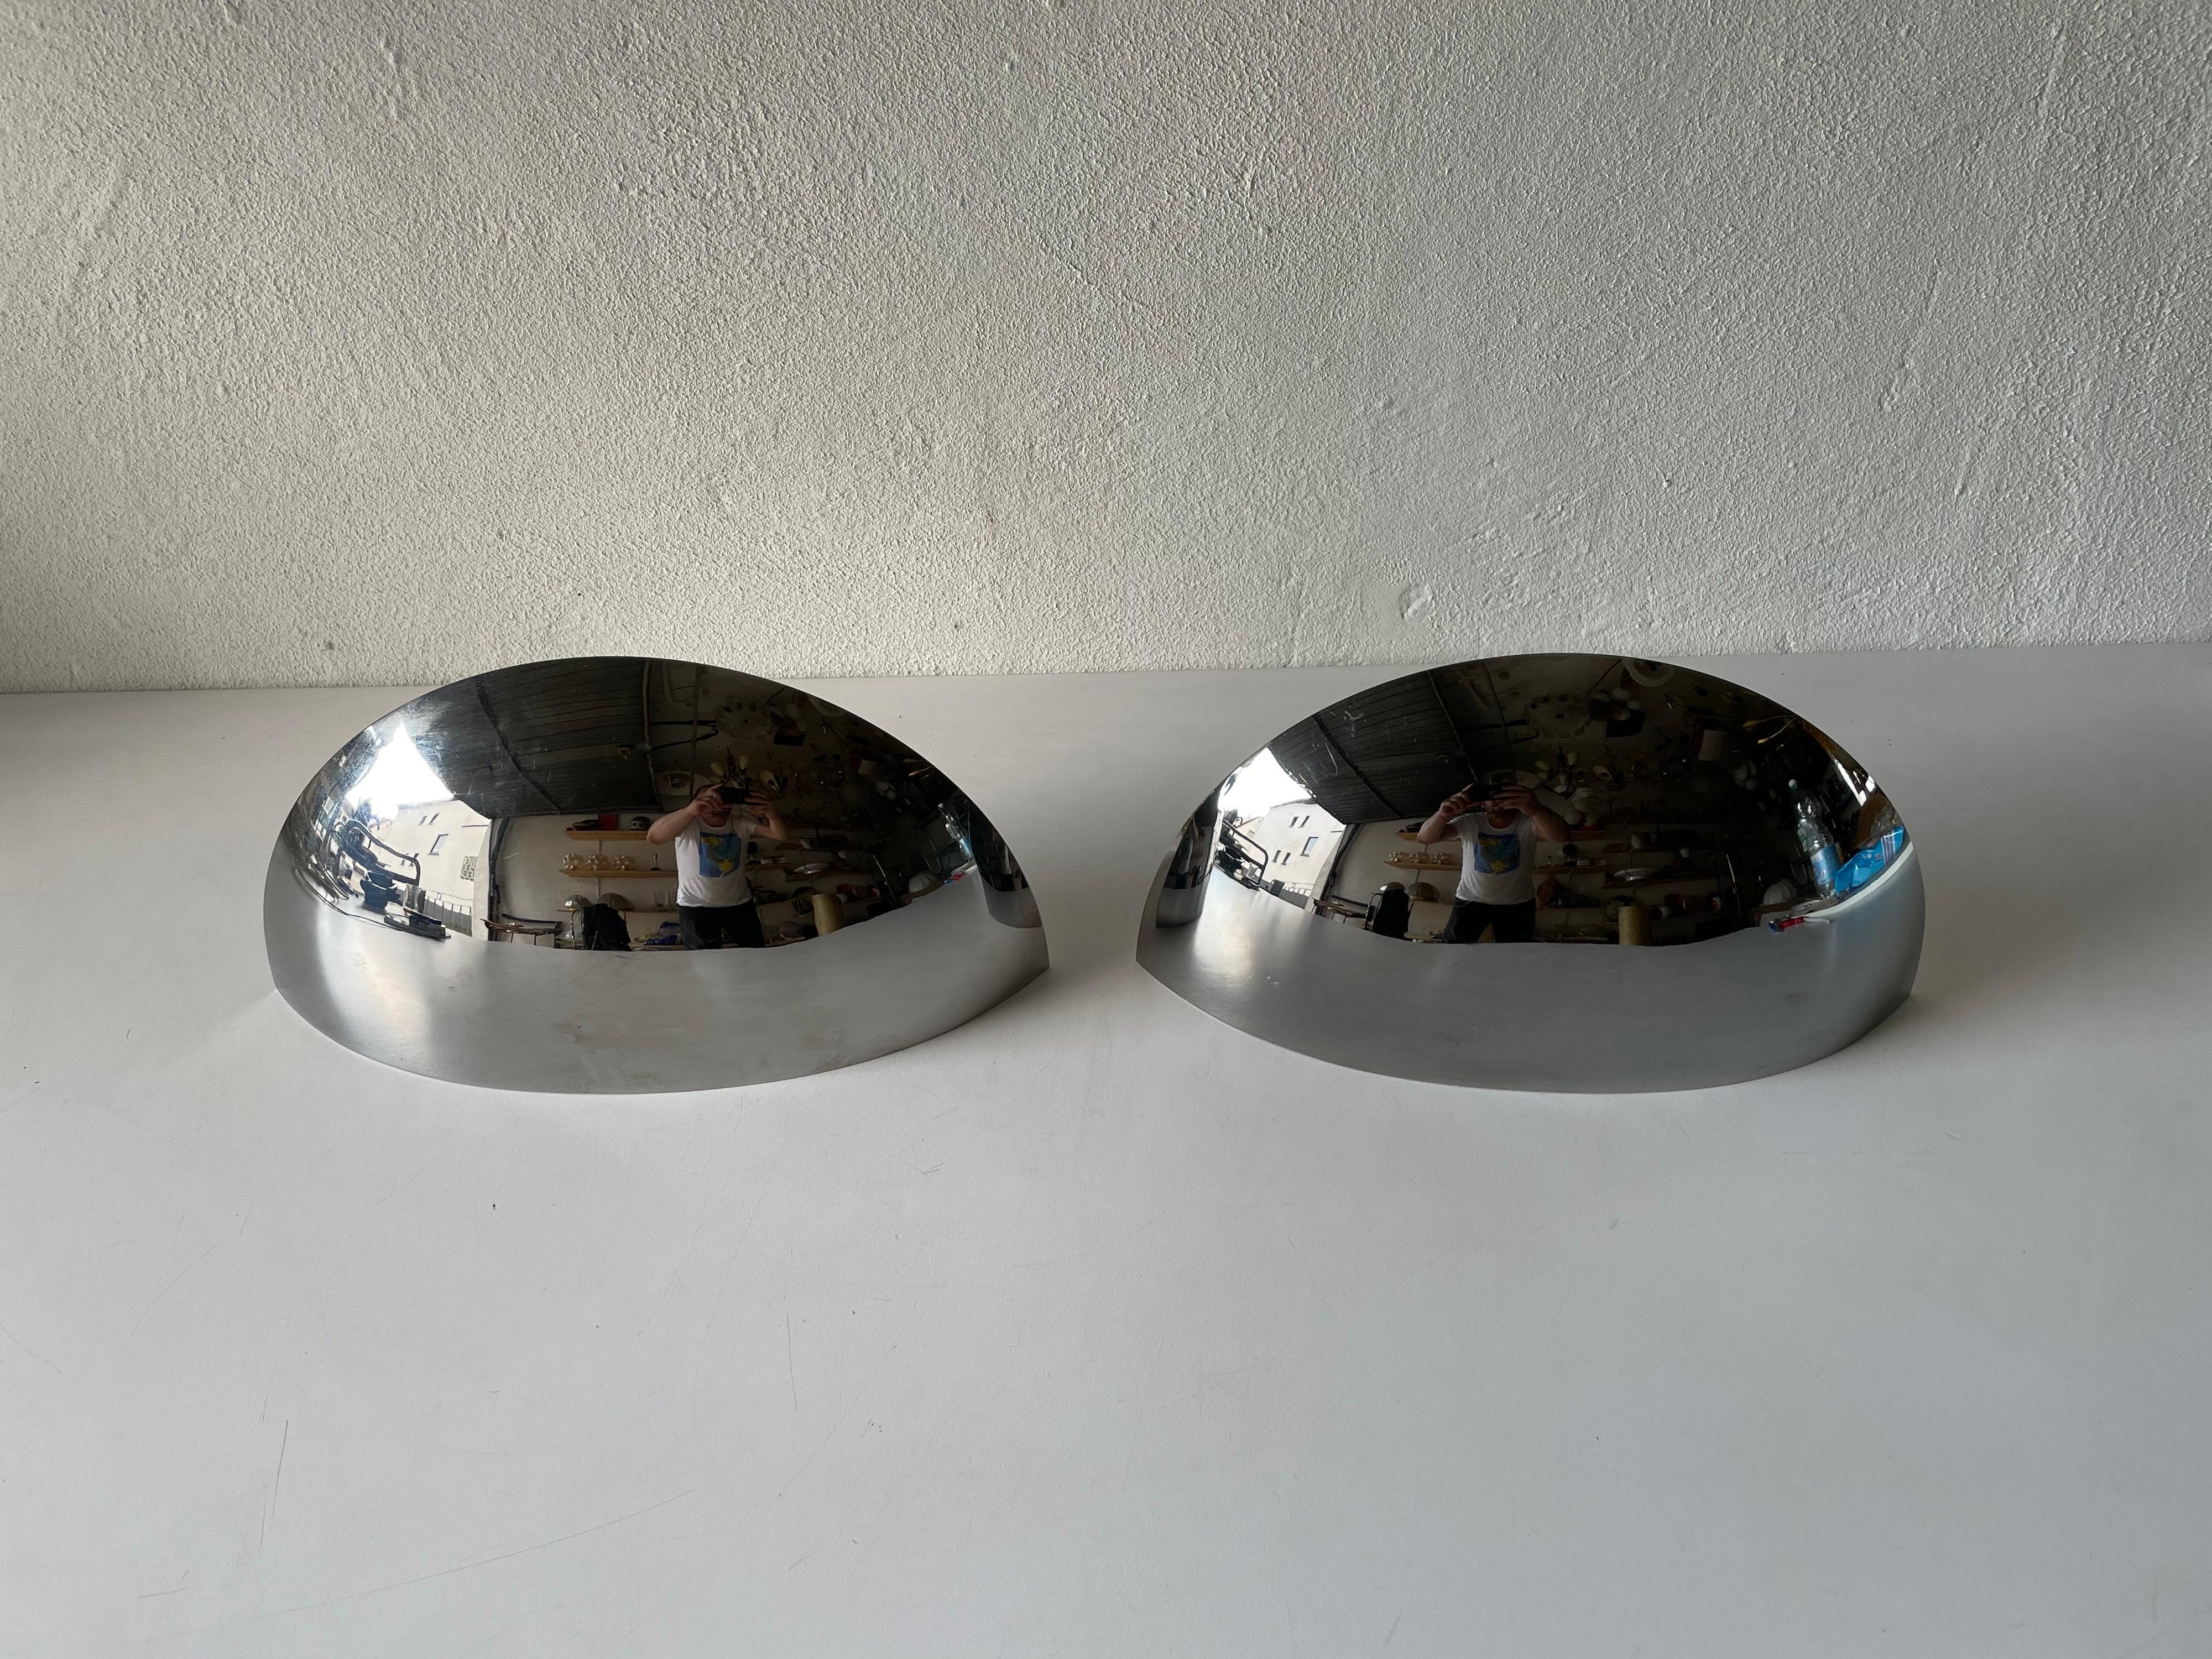 Pair of chrome sconces by Art-Line, 1980s, Germany

Very elegant and Minimalist wall lamps

Lamps are in very good condition.

These lamps works with 2xE14 standard light bulbs. Each lamp works with 1 light bulb. Max 40 W
Wired and suitable